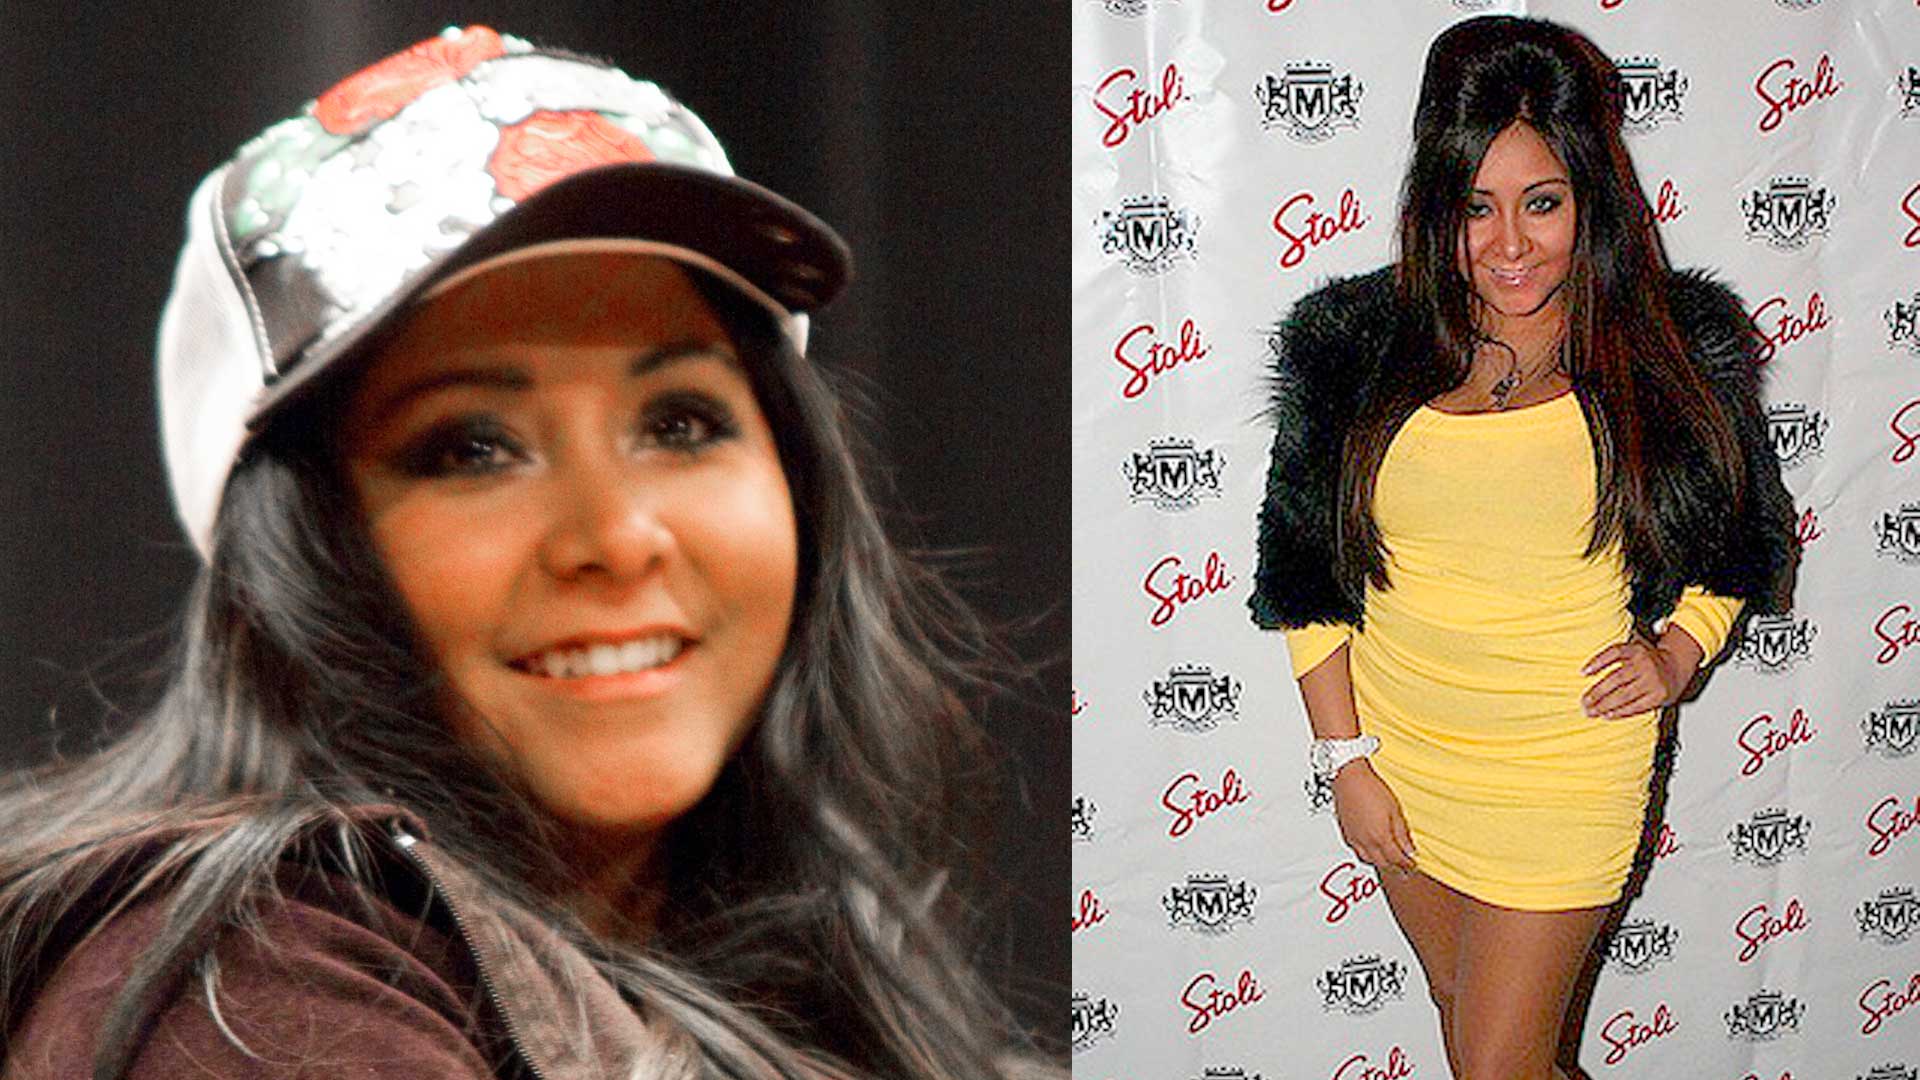 How TMZ Used Twitter as a Newsgathering Tool to Break Snooki's Jersey Shore Arrest